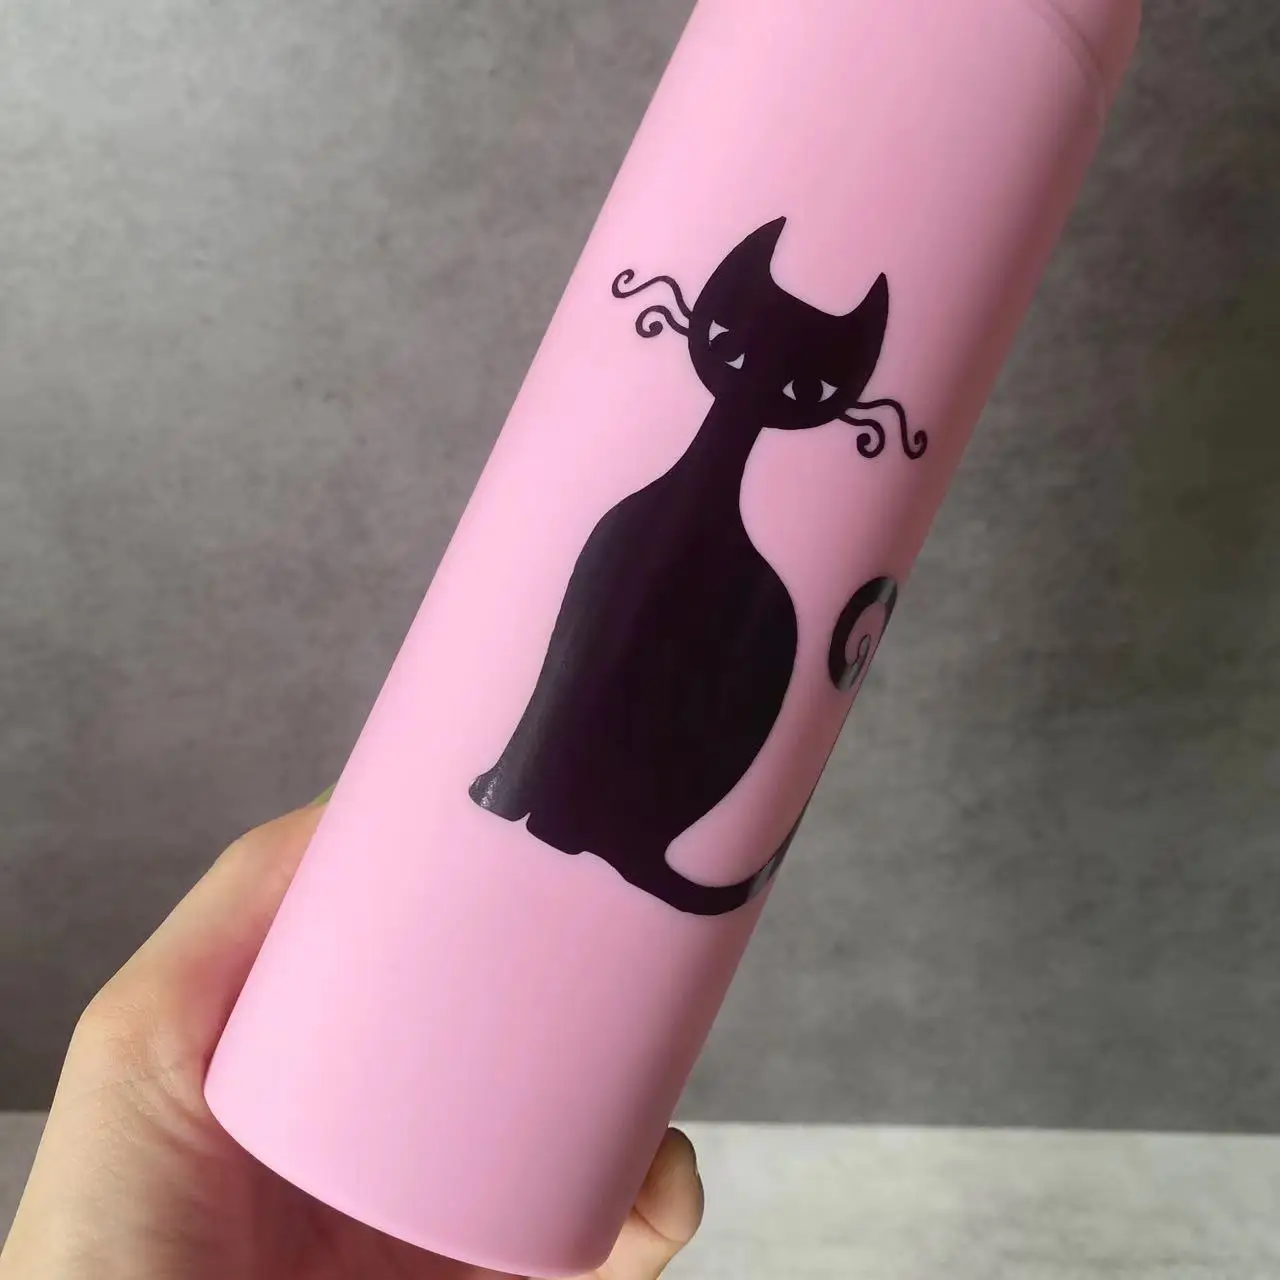 https://ae01.alicdn.com/kf/Sfe5c01c0e38040d9aab62da9bec553f9X/Cat-Water-Bottle-Personalized-Bottle-Portable-Tumbler-Plastic-Cup-Birthday-Gift-Double-Wall-Tea-Bottle-Cup.jpg